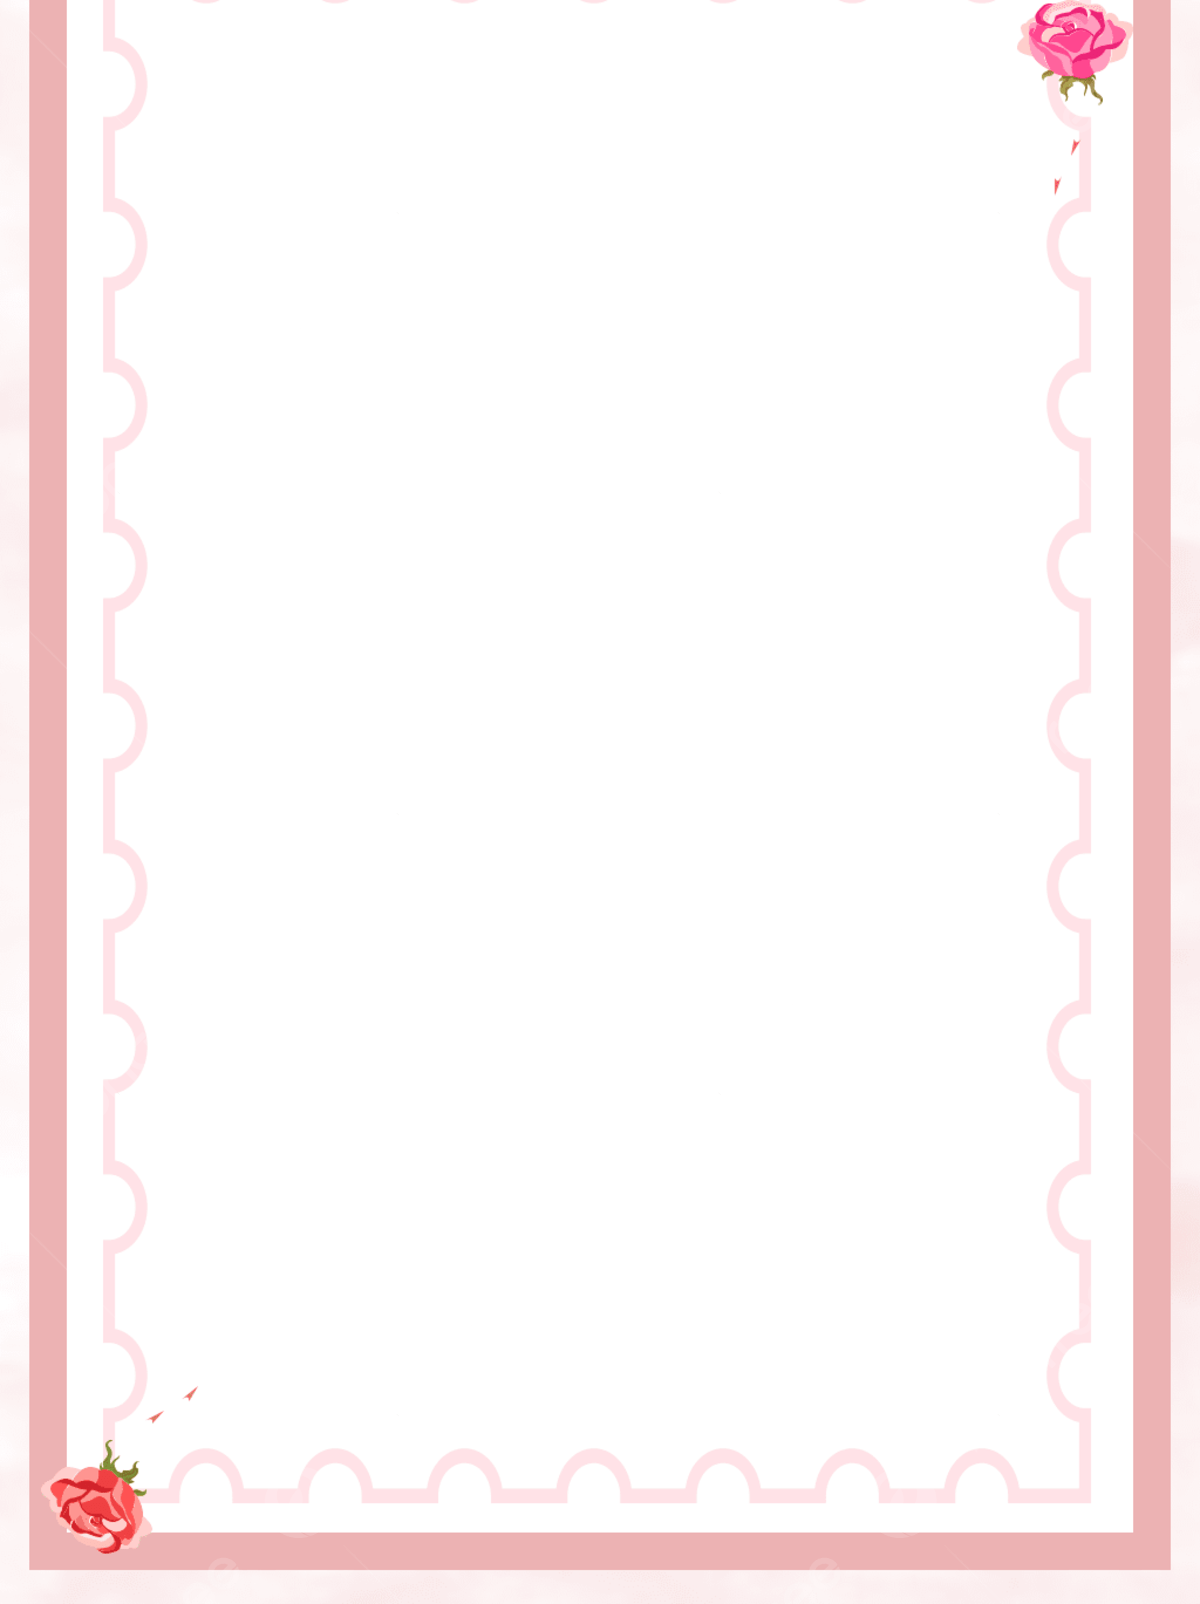 Pink Aesthetic Flower Border Background Wallpaper Image For Free Download